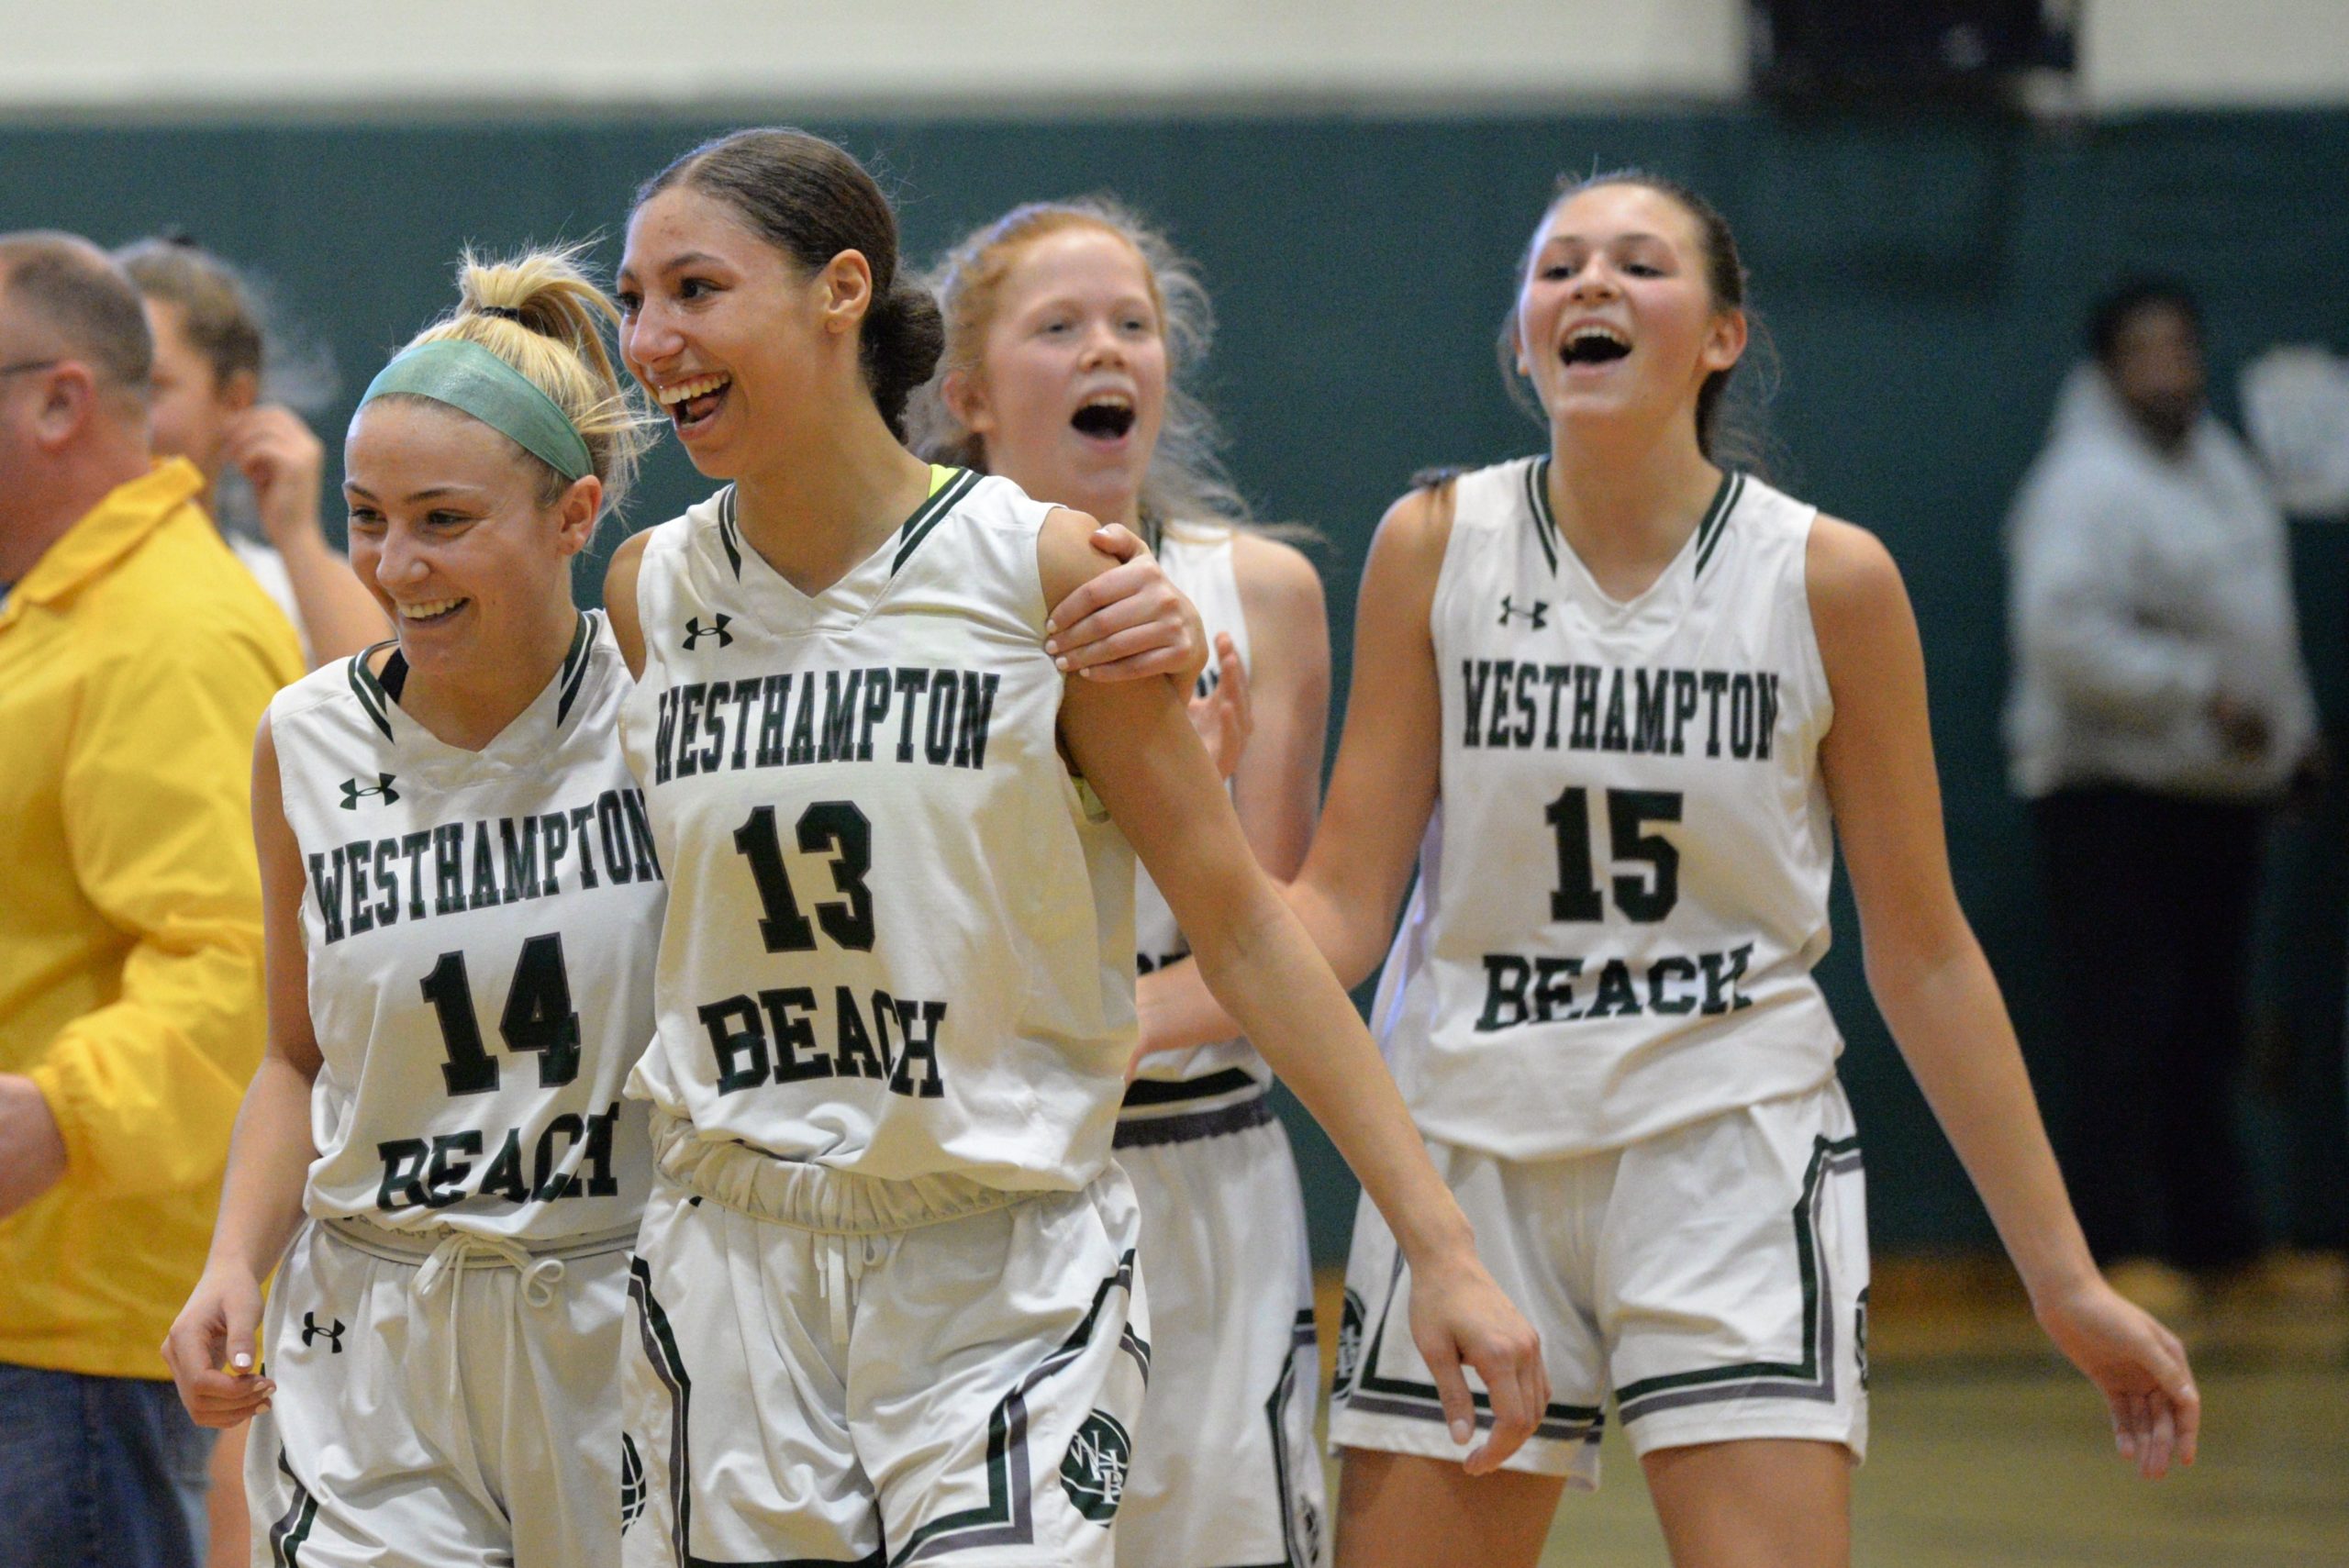 The Lady Canes are all smiles after defeating Hauppauge in the county semis on Friday afternoon.